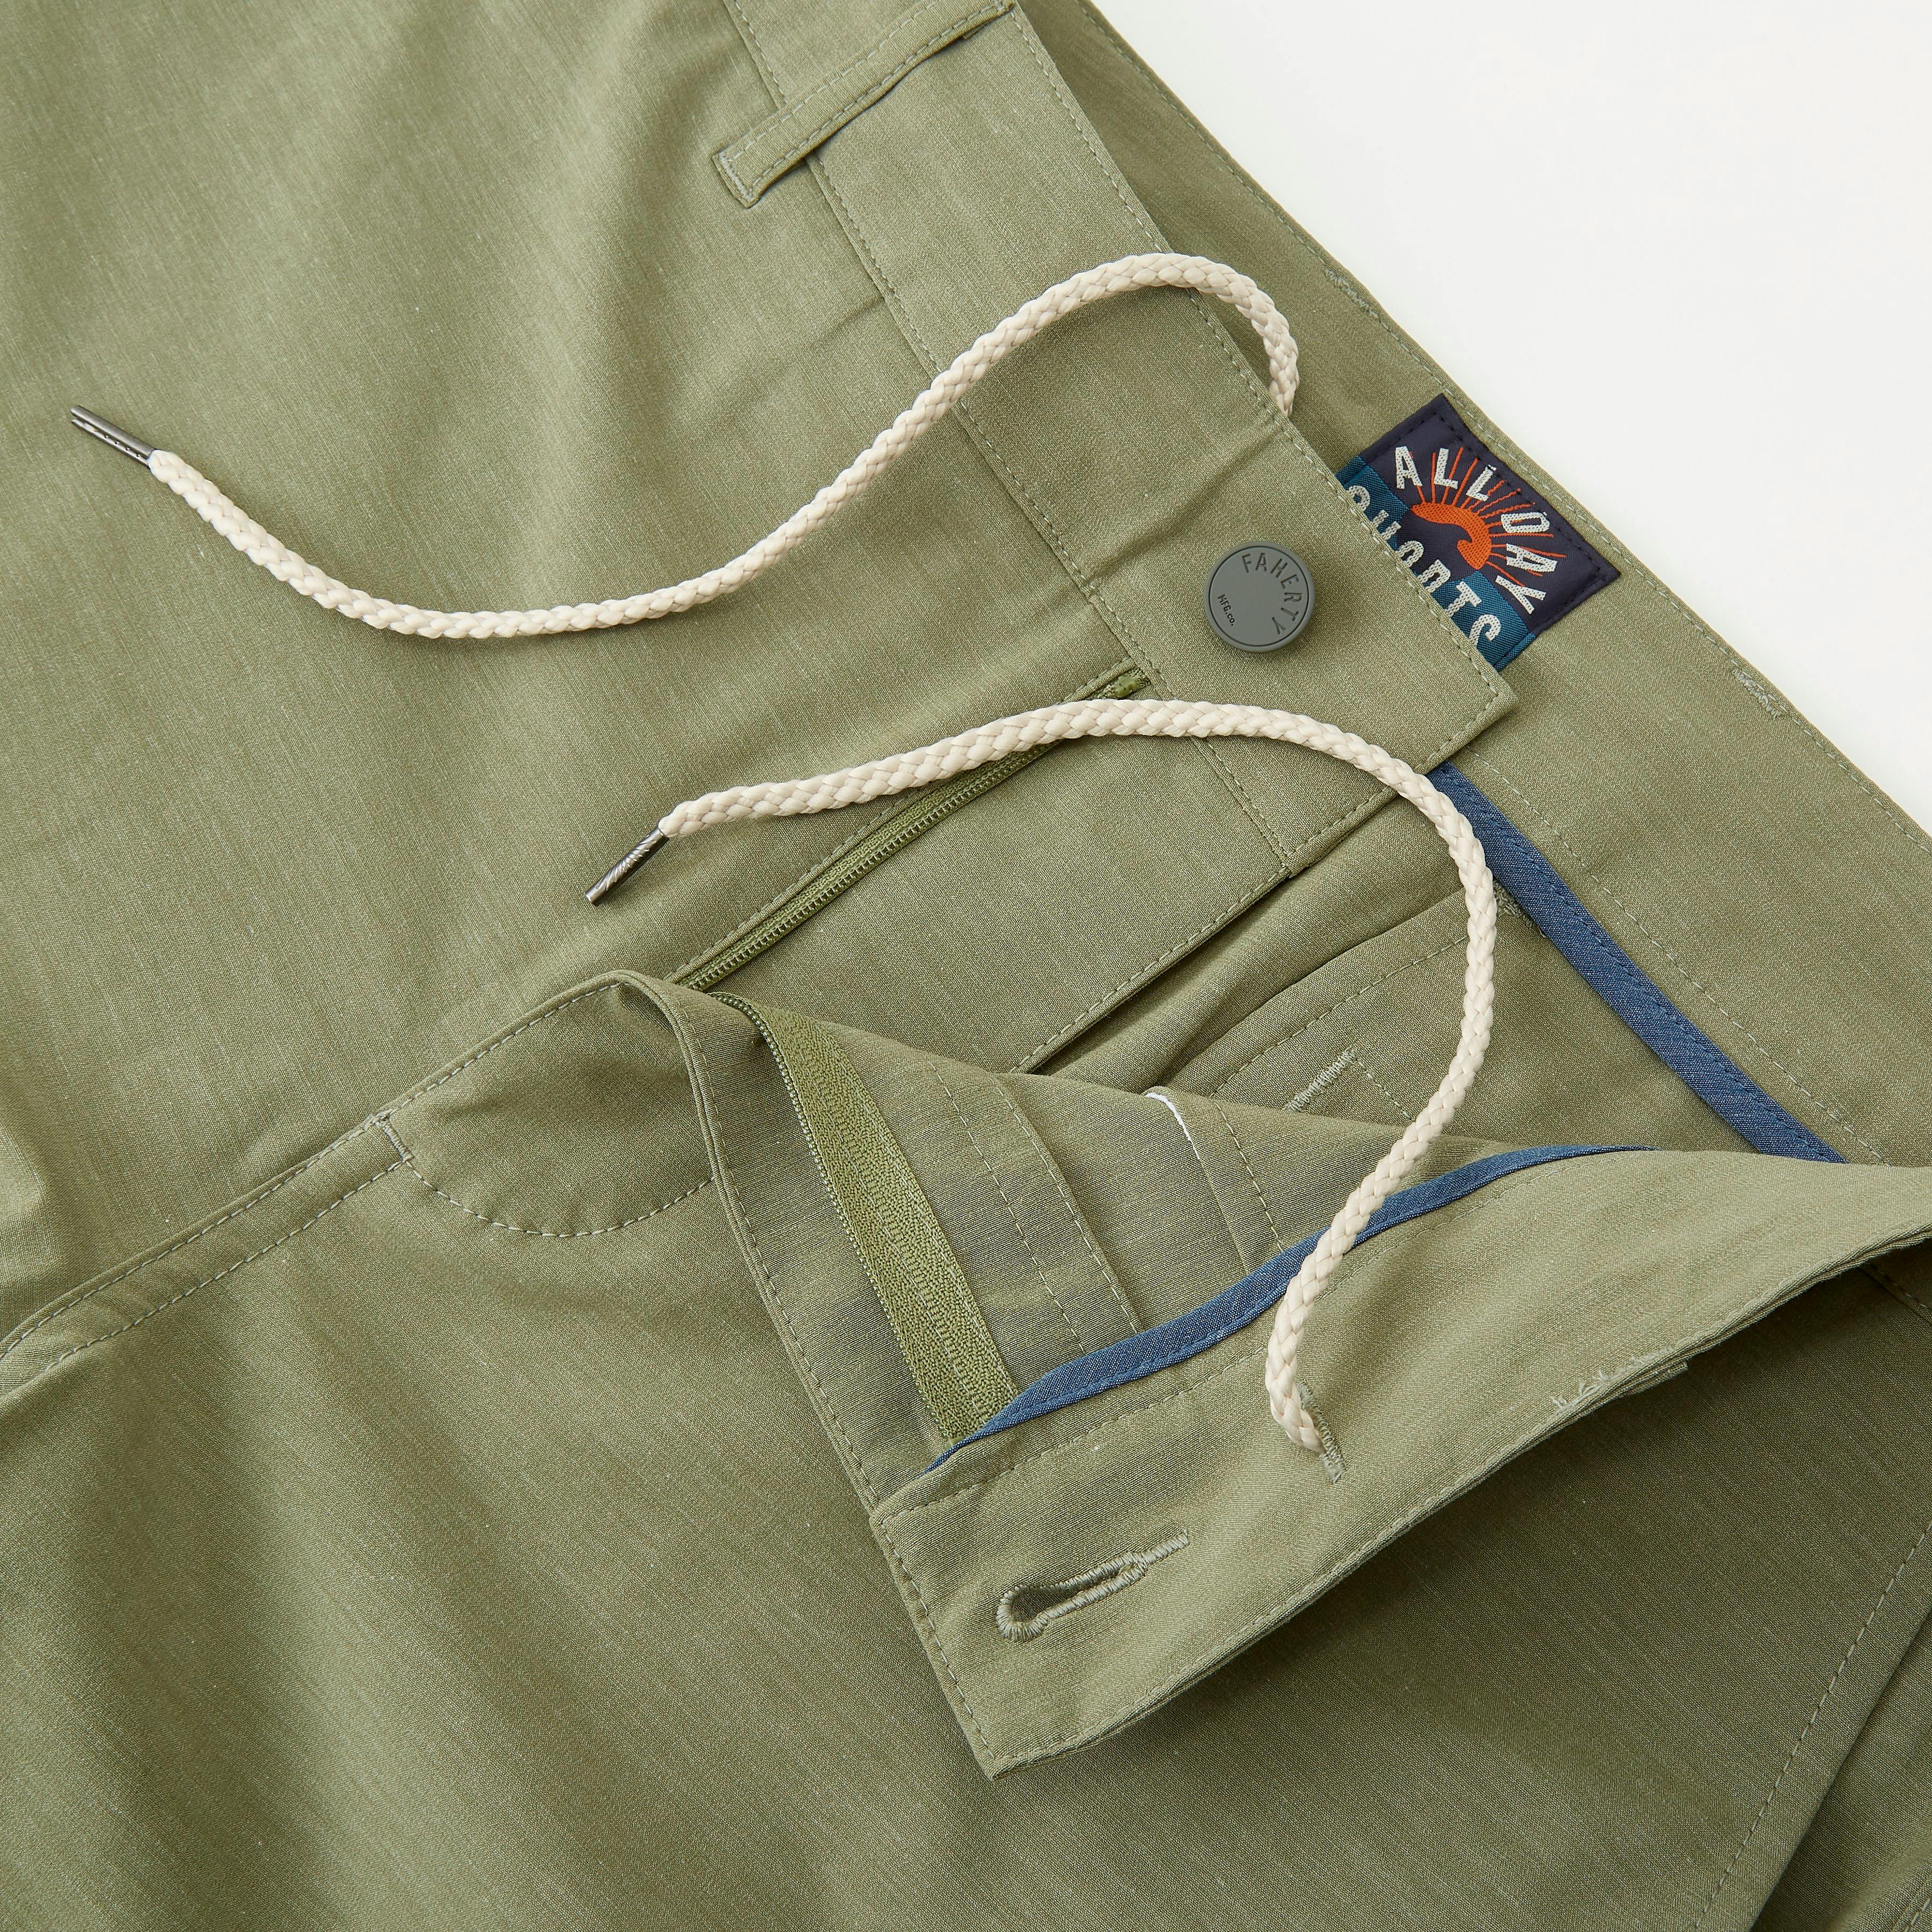 Faherty Brand Belt Loop All Day Shorts - 7"